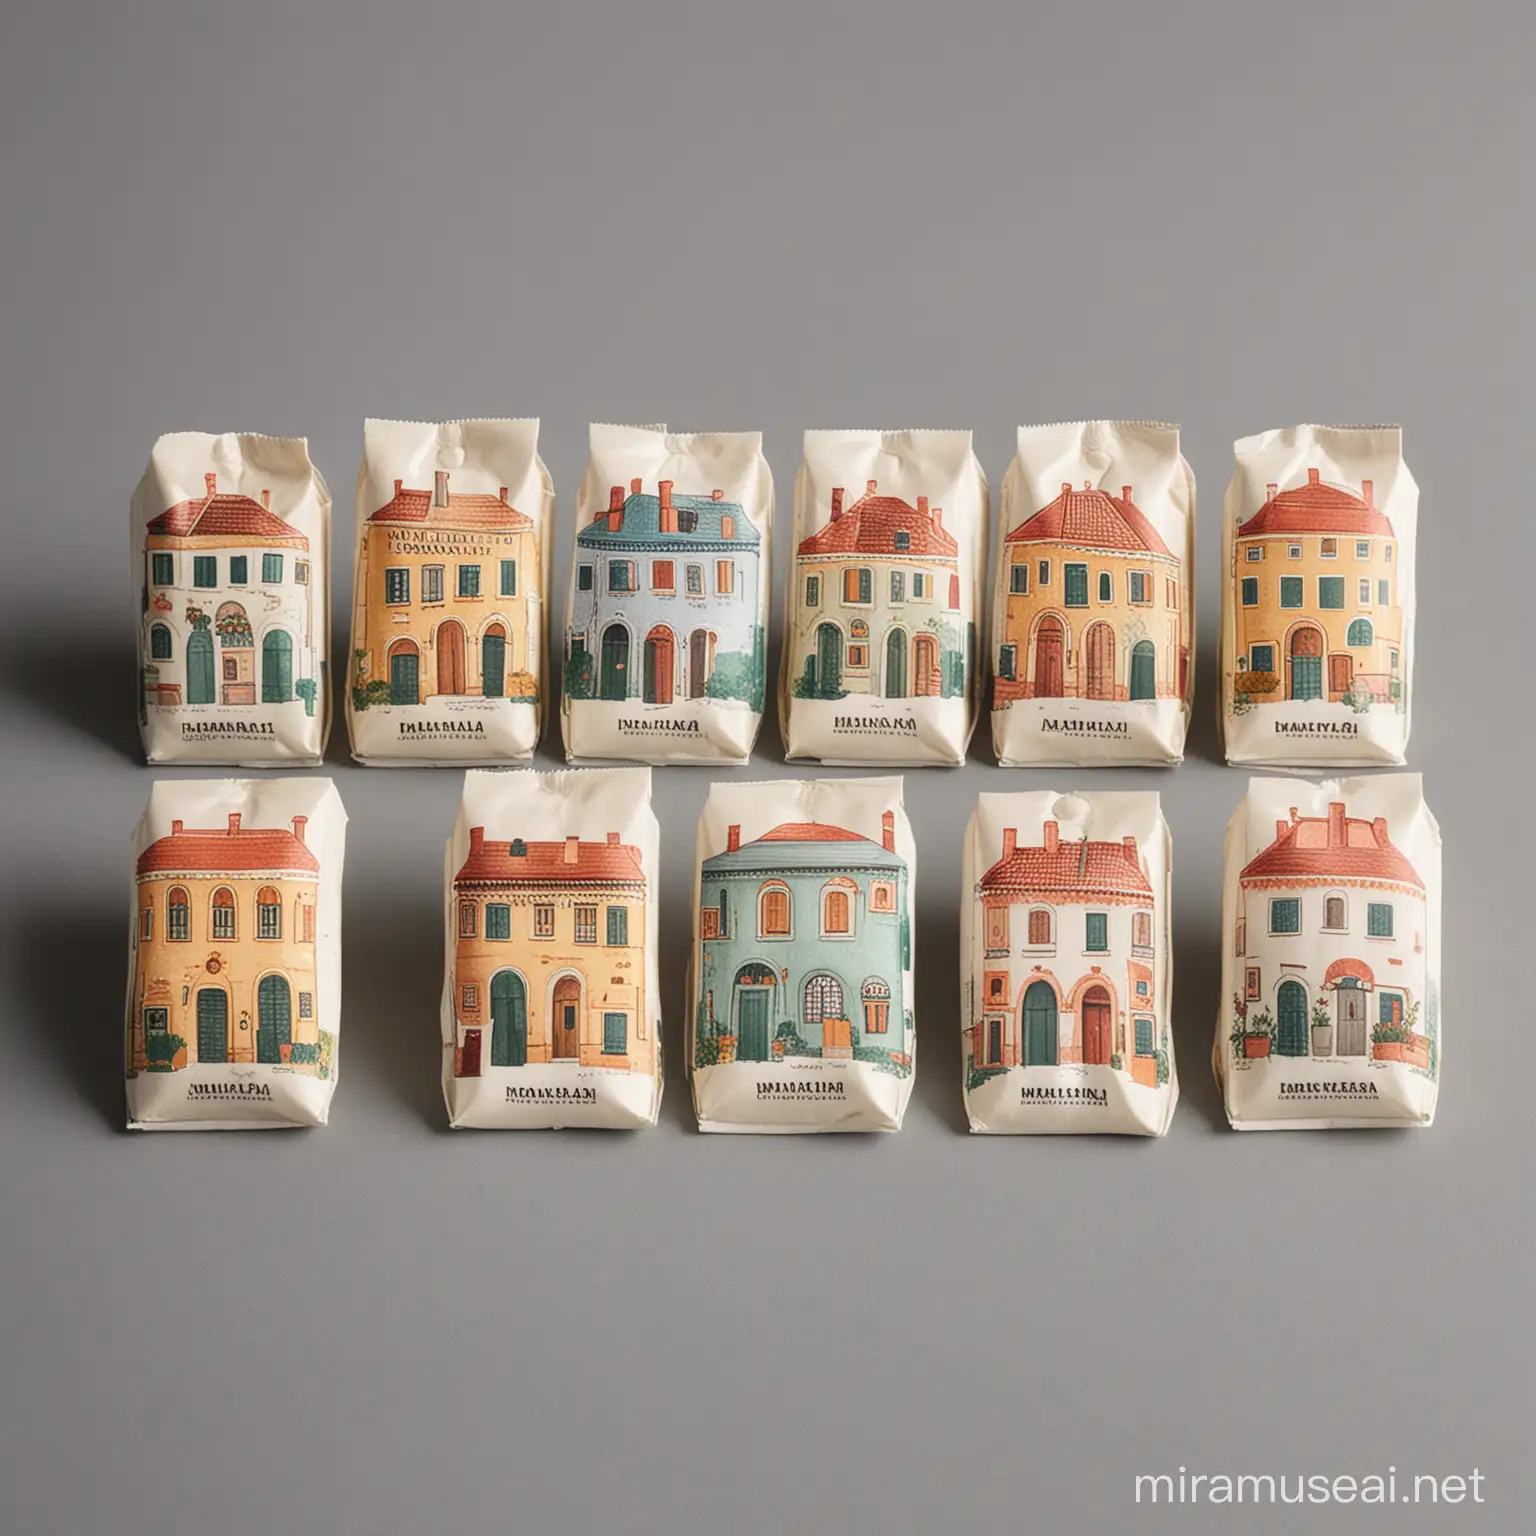 
Set of small milk packets with prints resembling Italian houses, forming a whole when placed side by side.